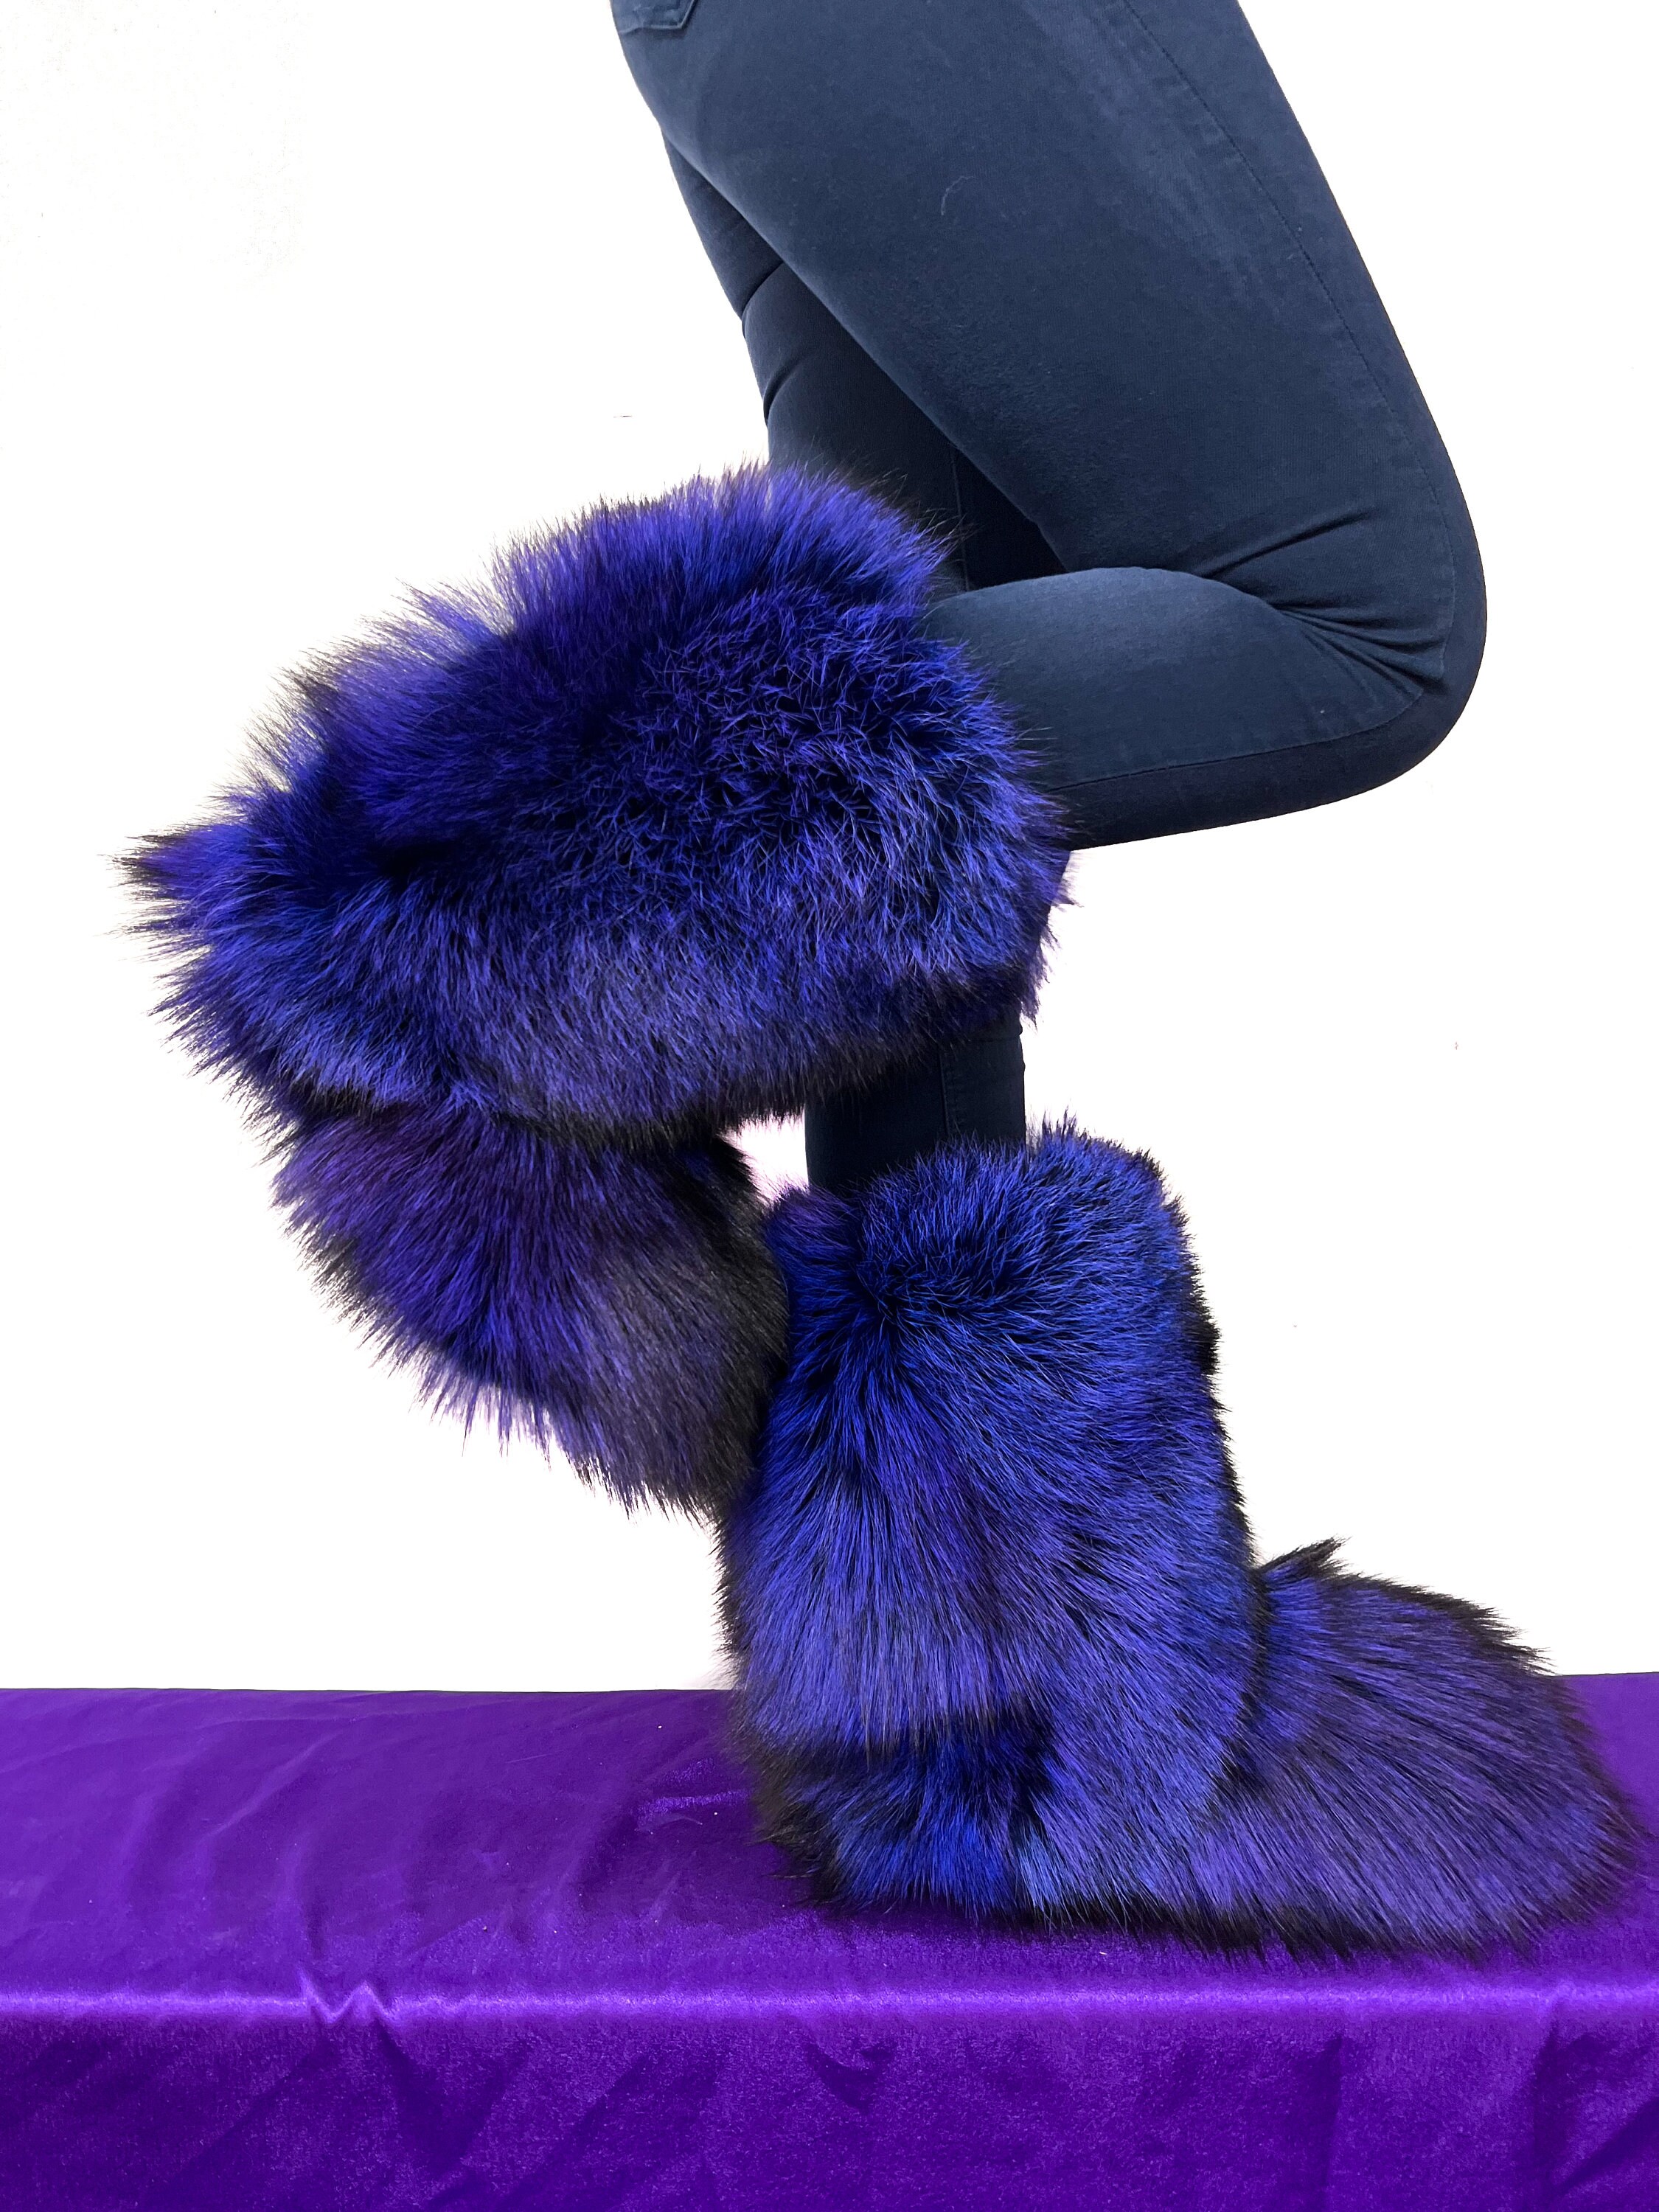 Double-sided Silver Fox Fur Boots for Indoor & Outdoor Arctic Boots Royal  Blue Color Lined in Fur - Etsy